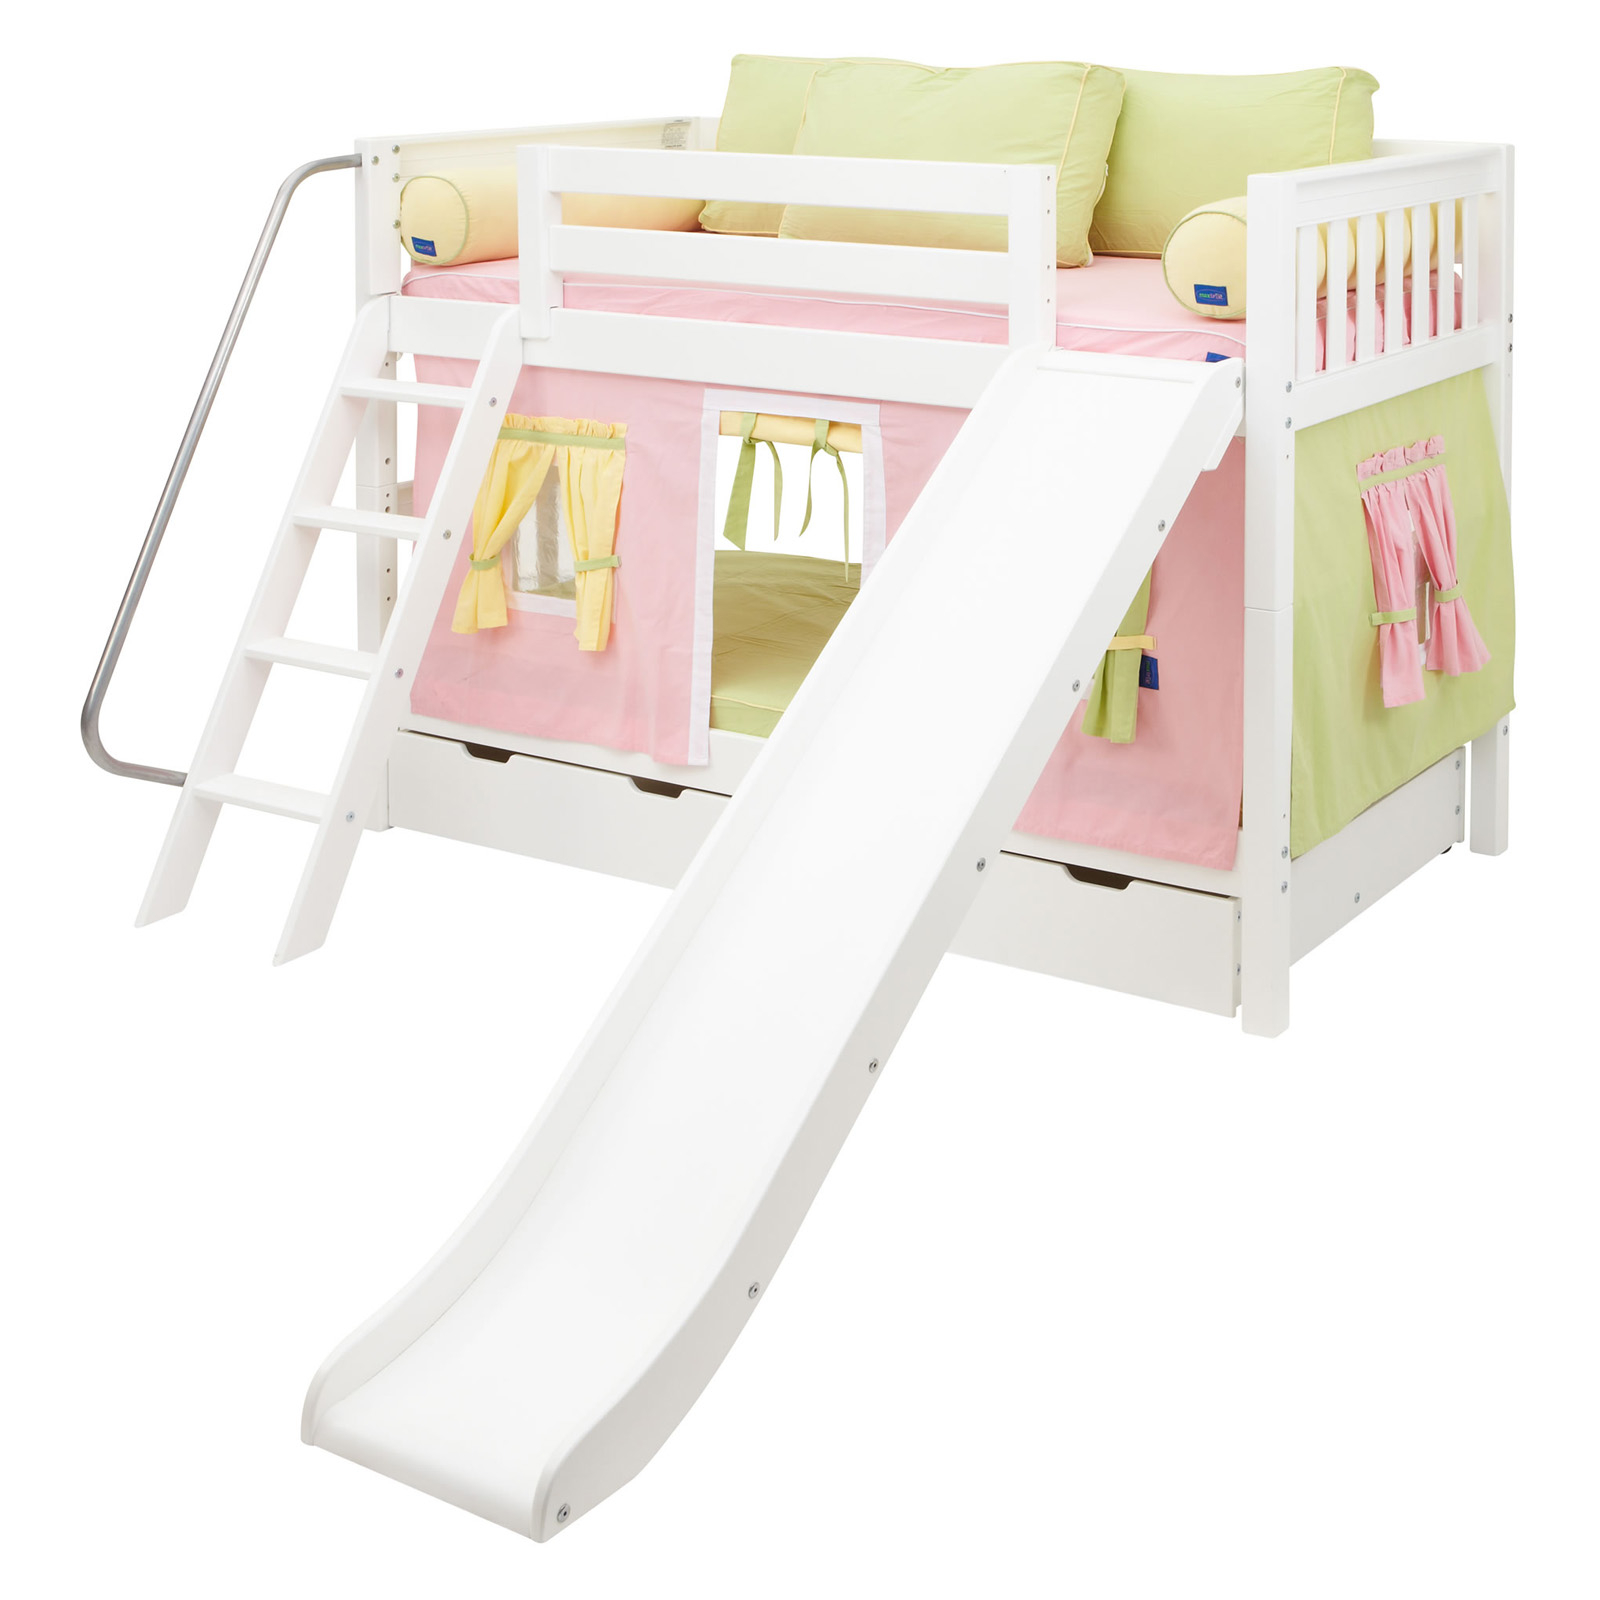 Laugh girl twin over twin slat slide tent bunk bed